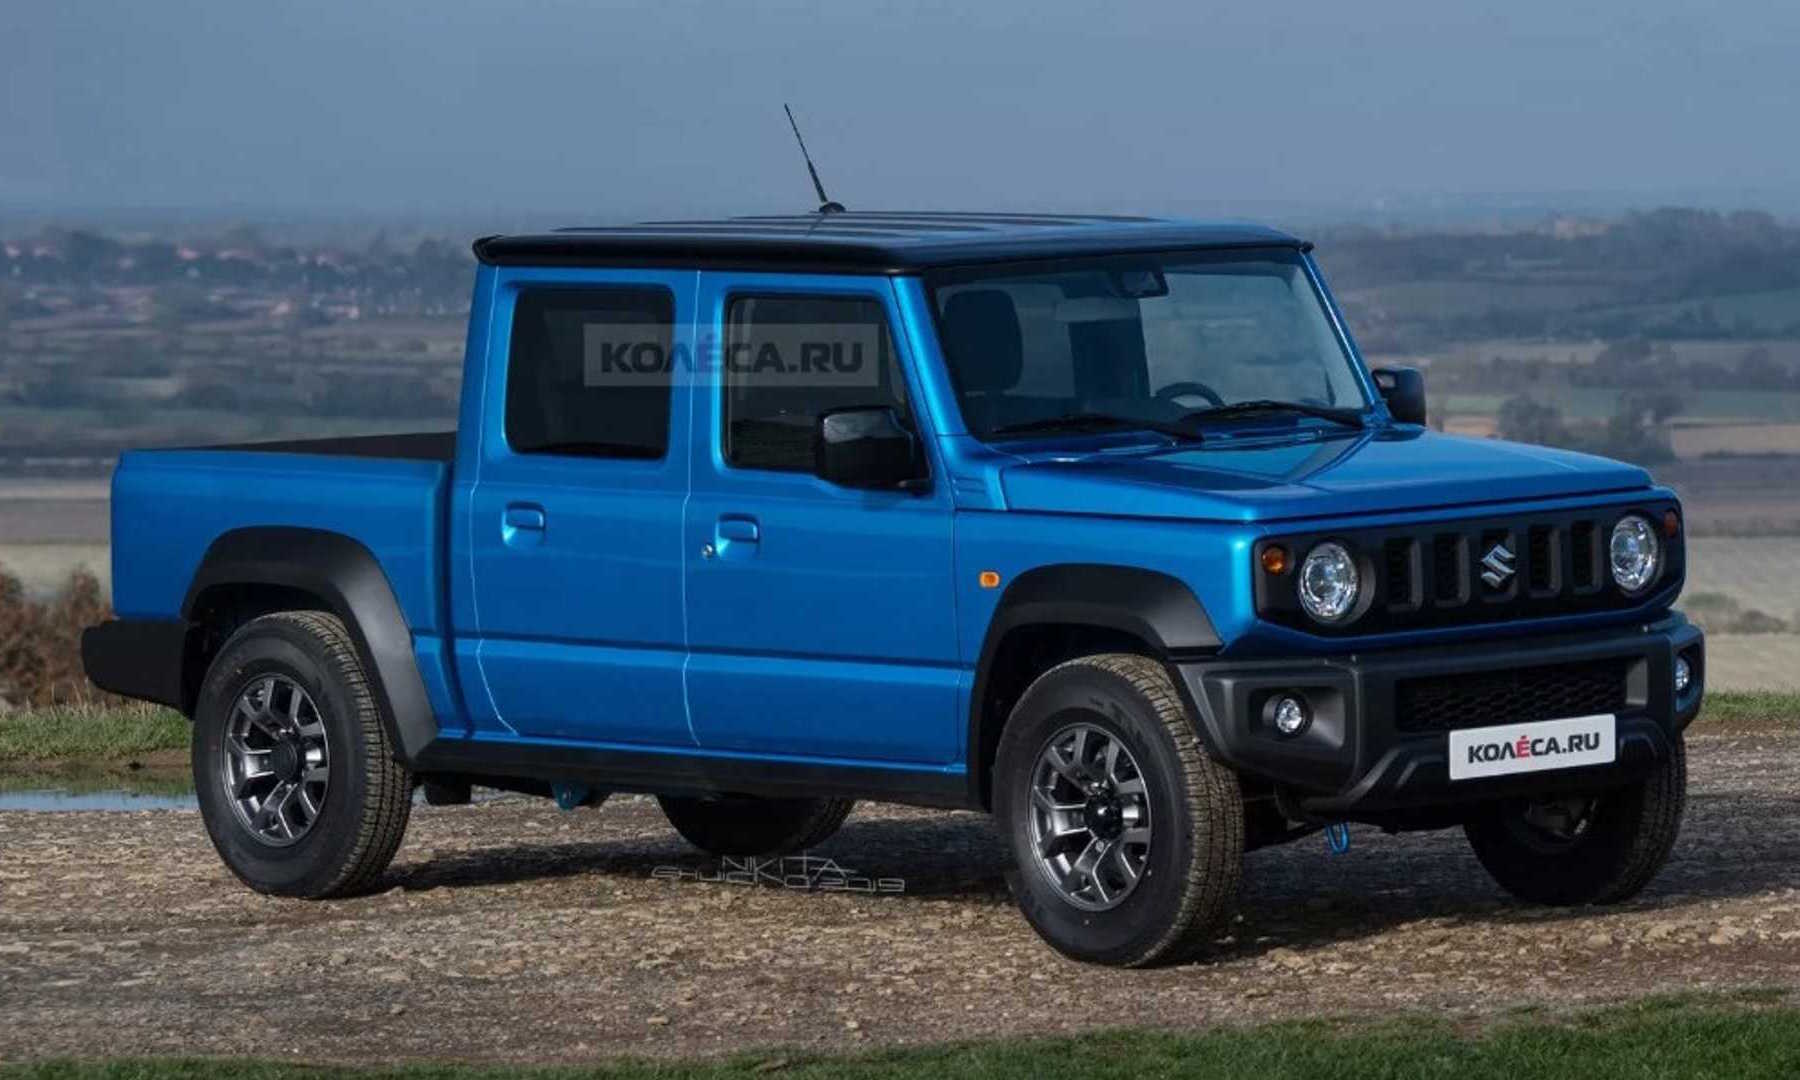 Suzuki Jimny dual-cab ute envisioned as perfect plucky workhorse